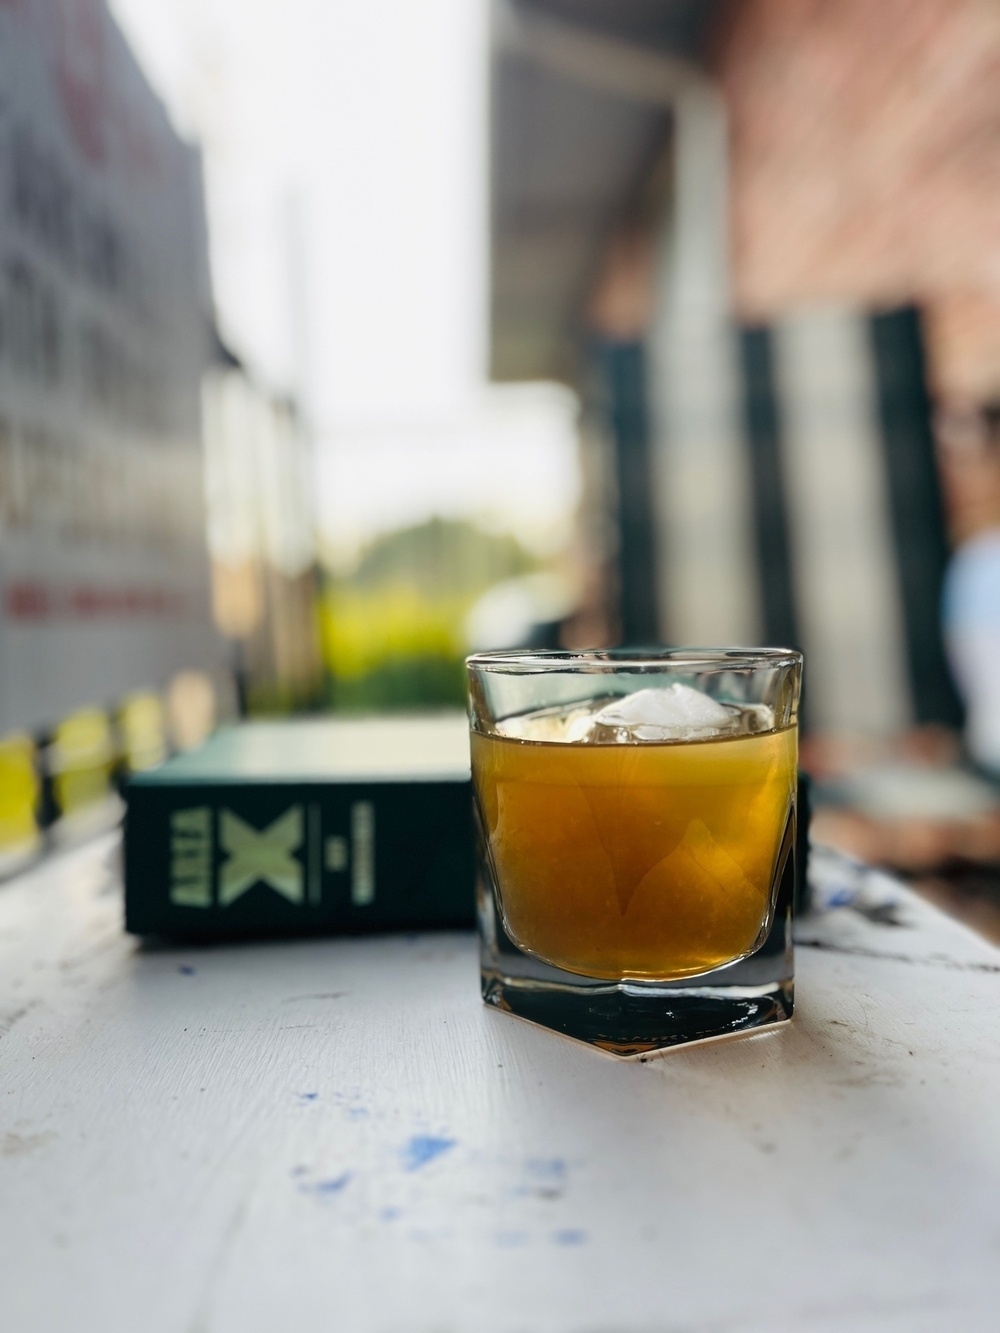 A whiskey glass with a cocktail in focus with a book behind it, sitting on a table, outdoors, background blurred